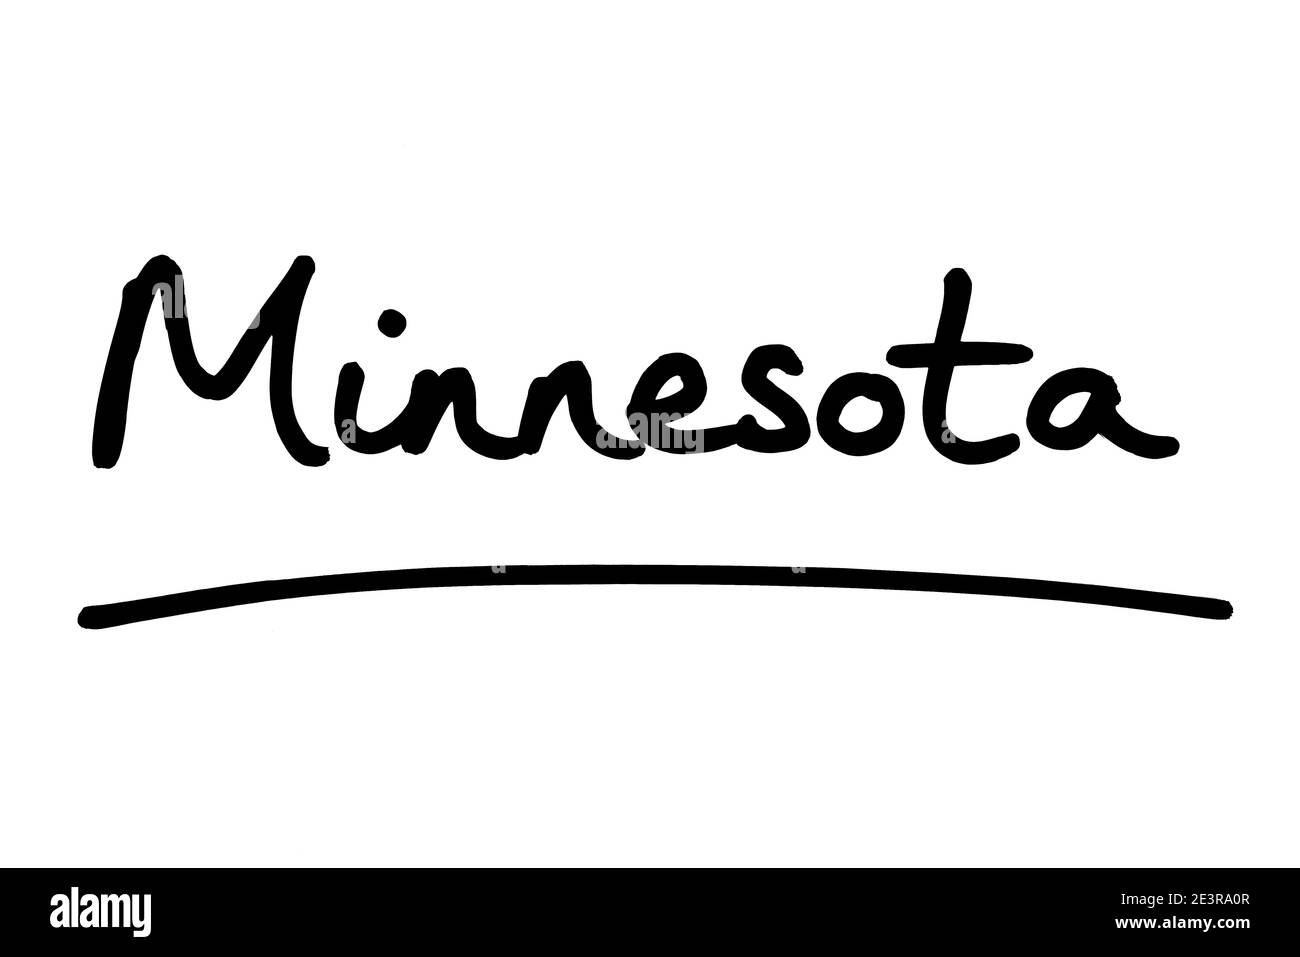 Minnesota - a state in the United States of America, handwritten on a white background. Stock Photo